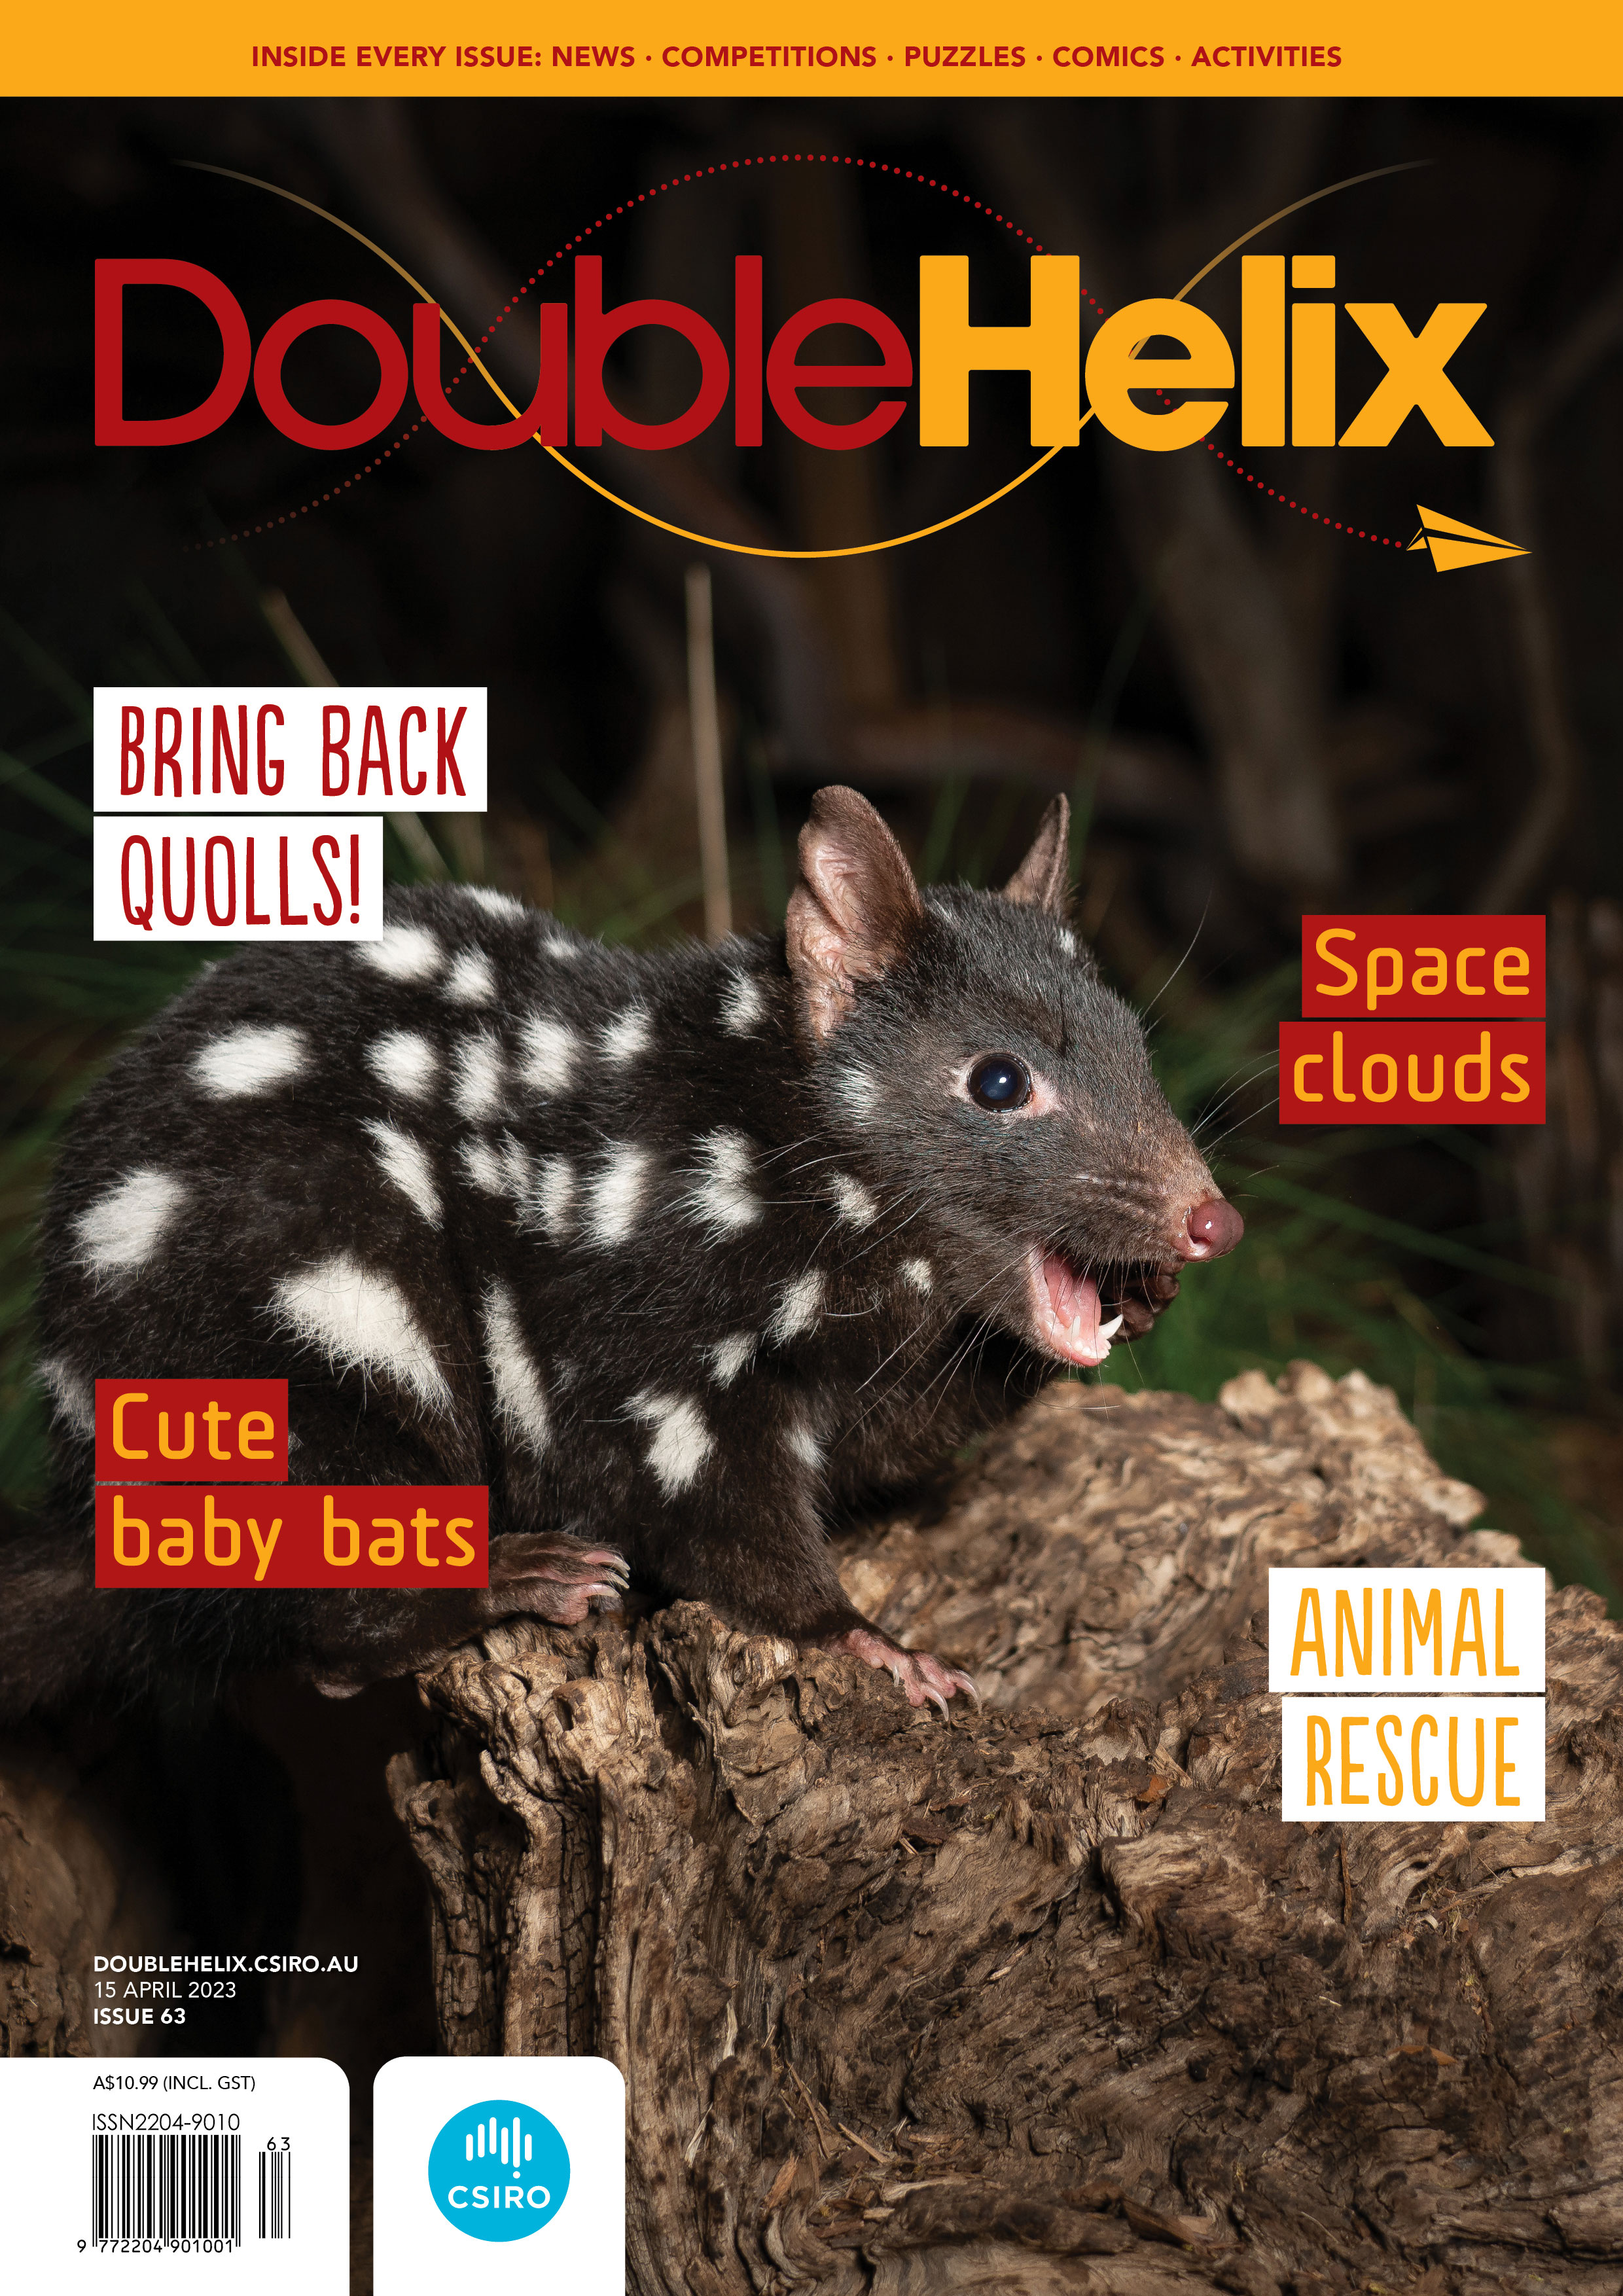 Cover image for Double Helix 63 featuring a quoll